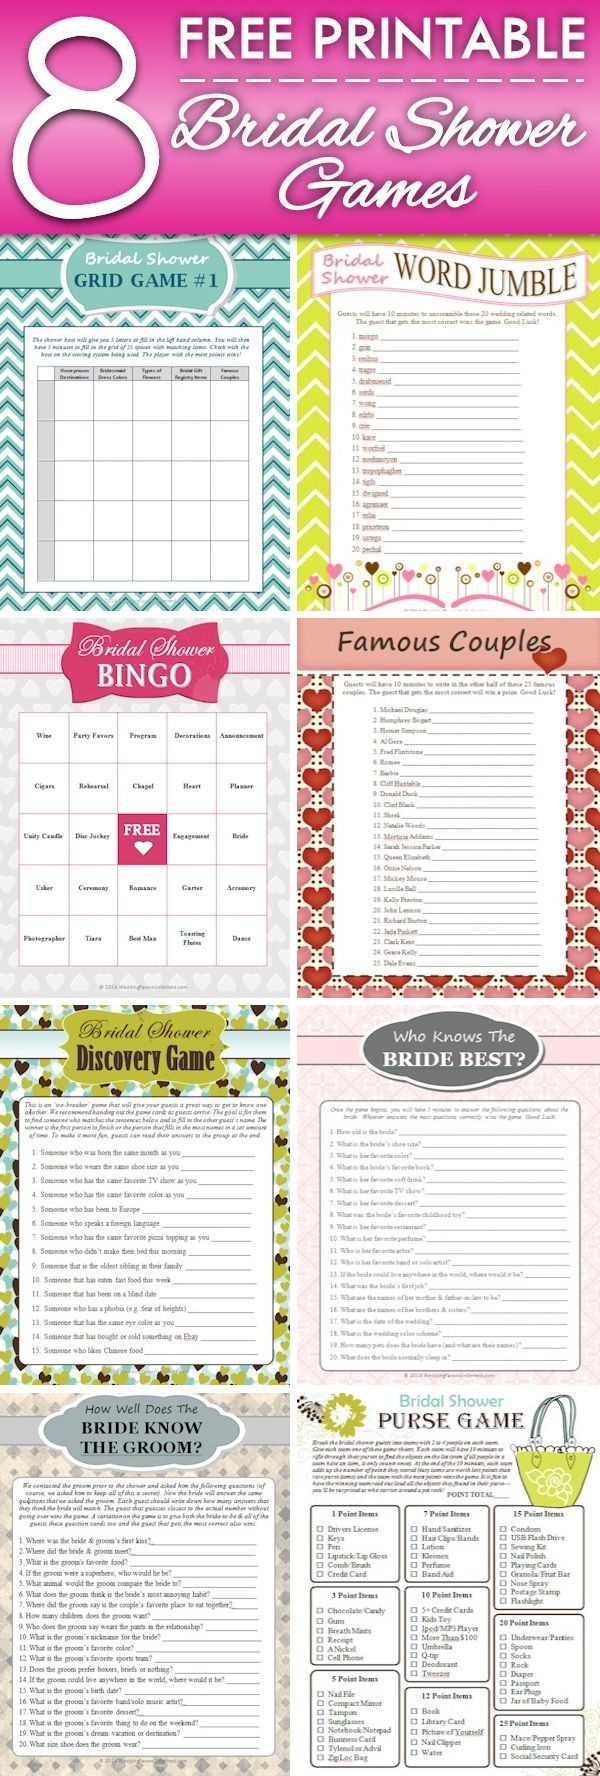 8 Free Printable Bridal Shower Games - Download Some Fun Today! | My - Free Printable Bridal Shower Games And Activities